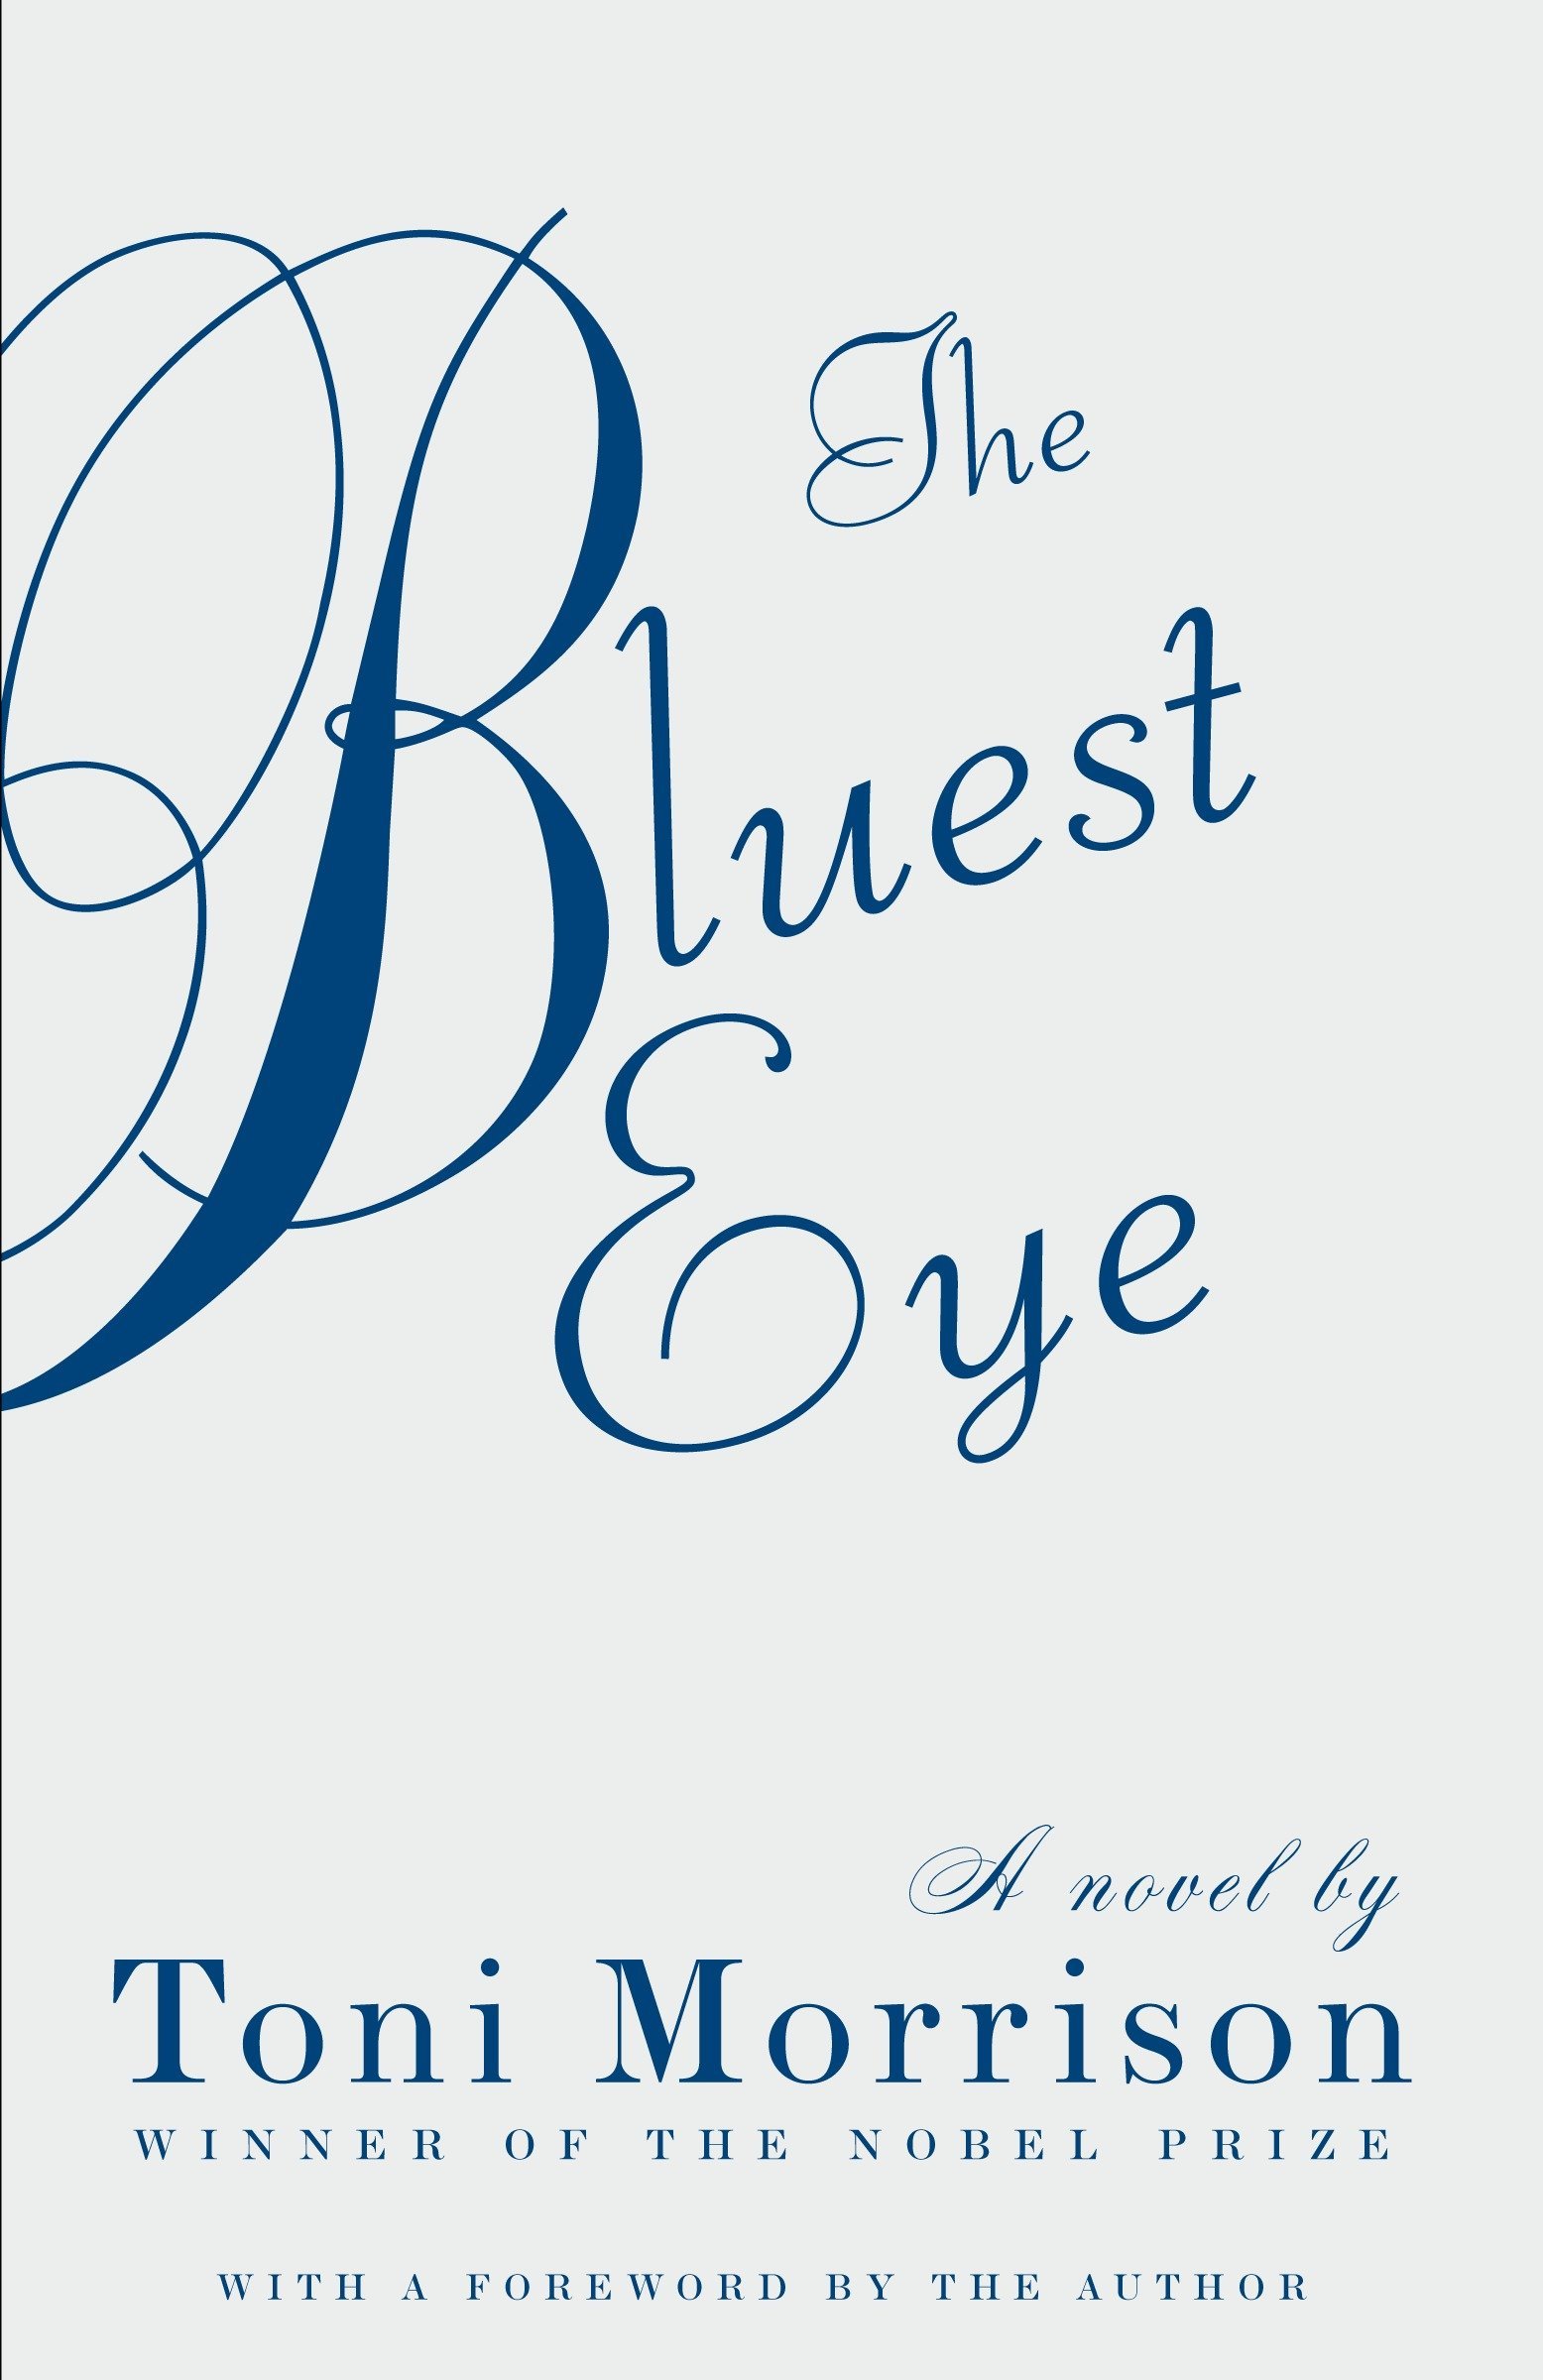 Cover of "the bluest eye," a novel by toni morrison, winner of the nobel prize, featuring a stylized blue letter "b" on a light background, with a foreword by the author.